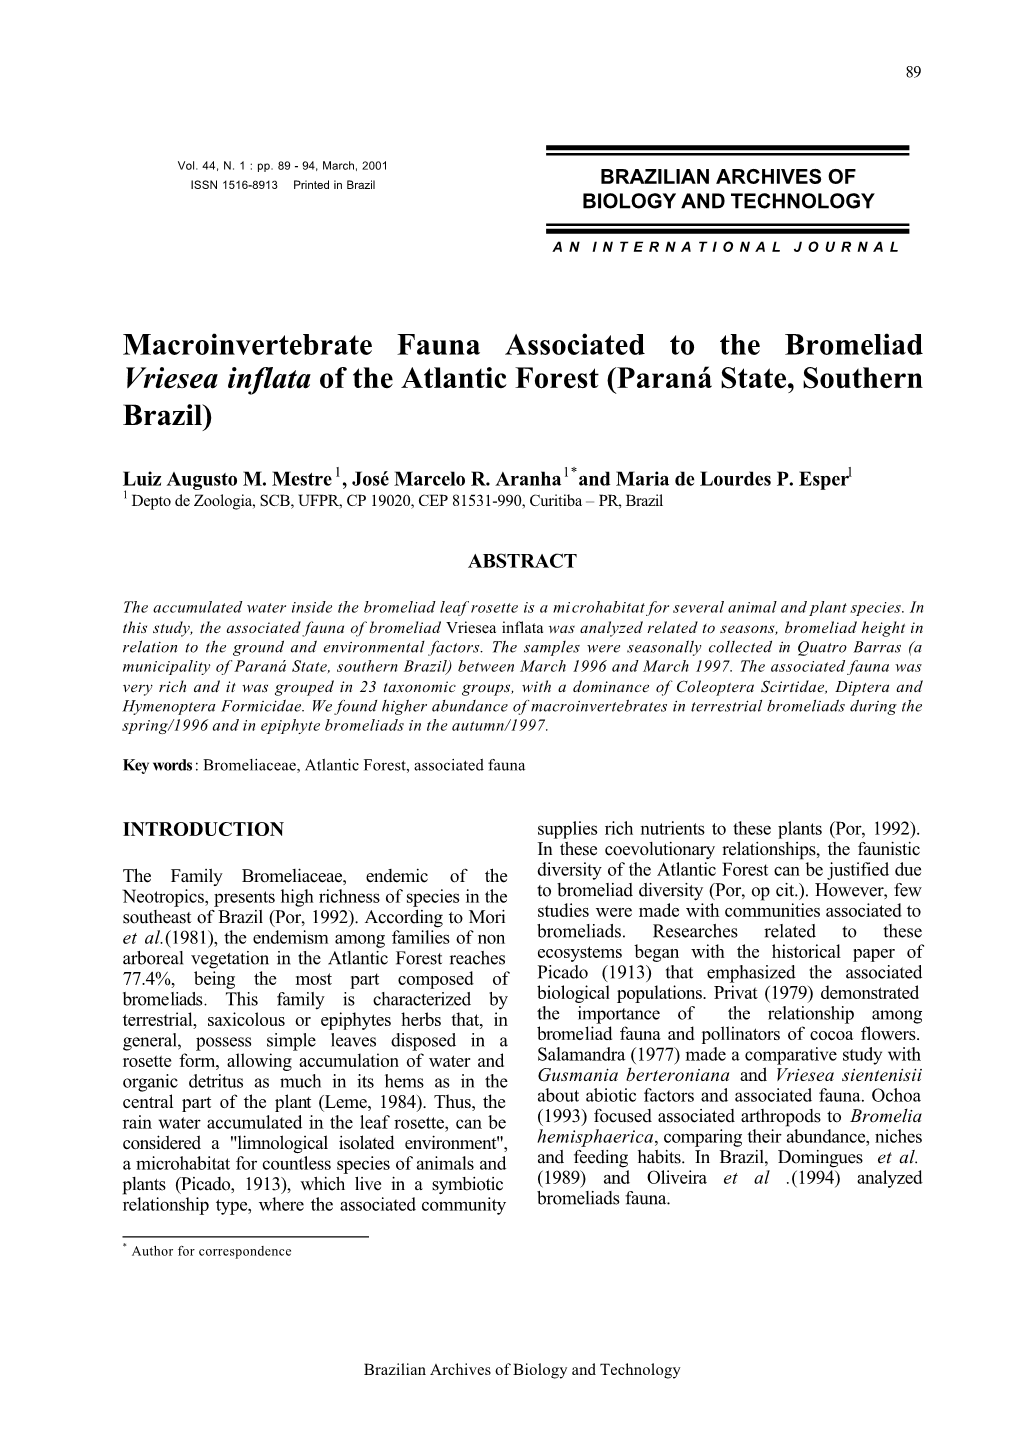 Macroinvertebrate Fauna Associated to the Bromeliad Vriesea Inflata of the Atlantic Forest (Paraná State, Southern Brazil)